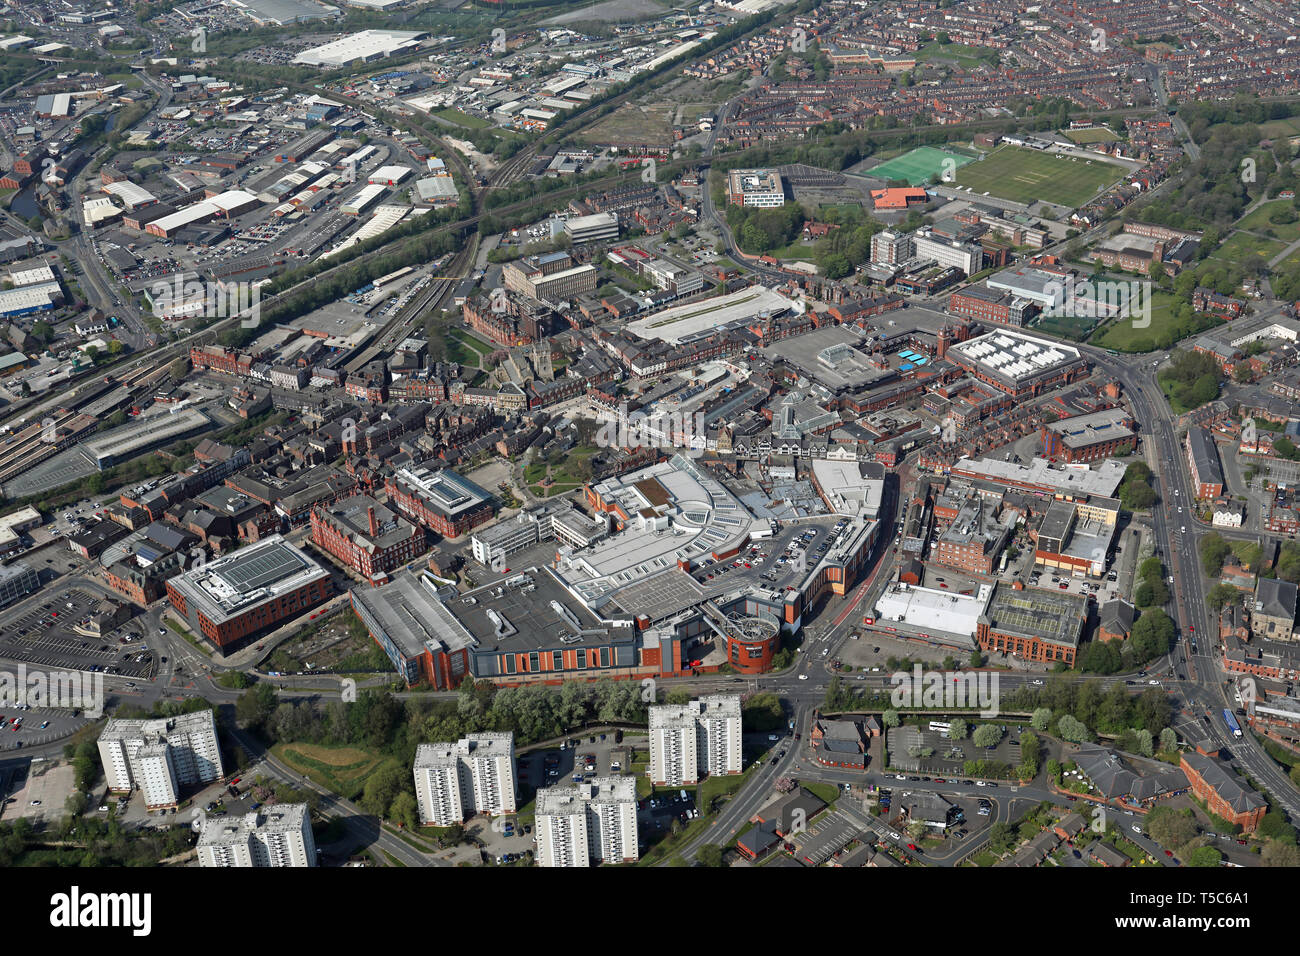 aerial view of Wigan town centre, Great Manchester Stock Photo